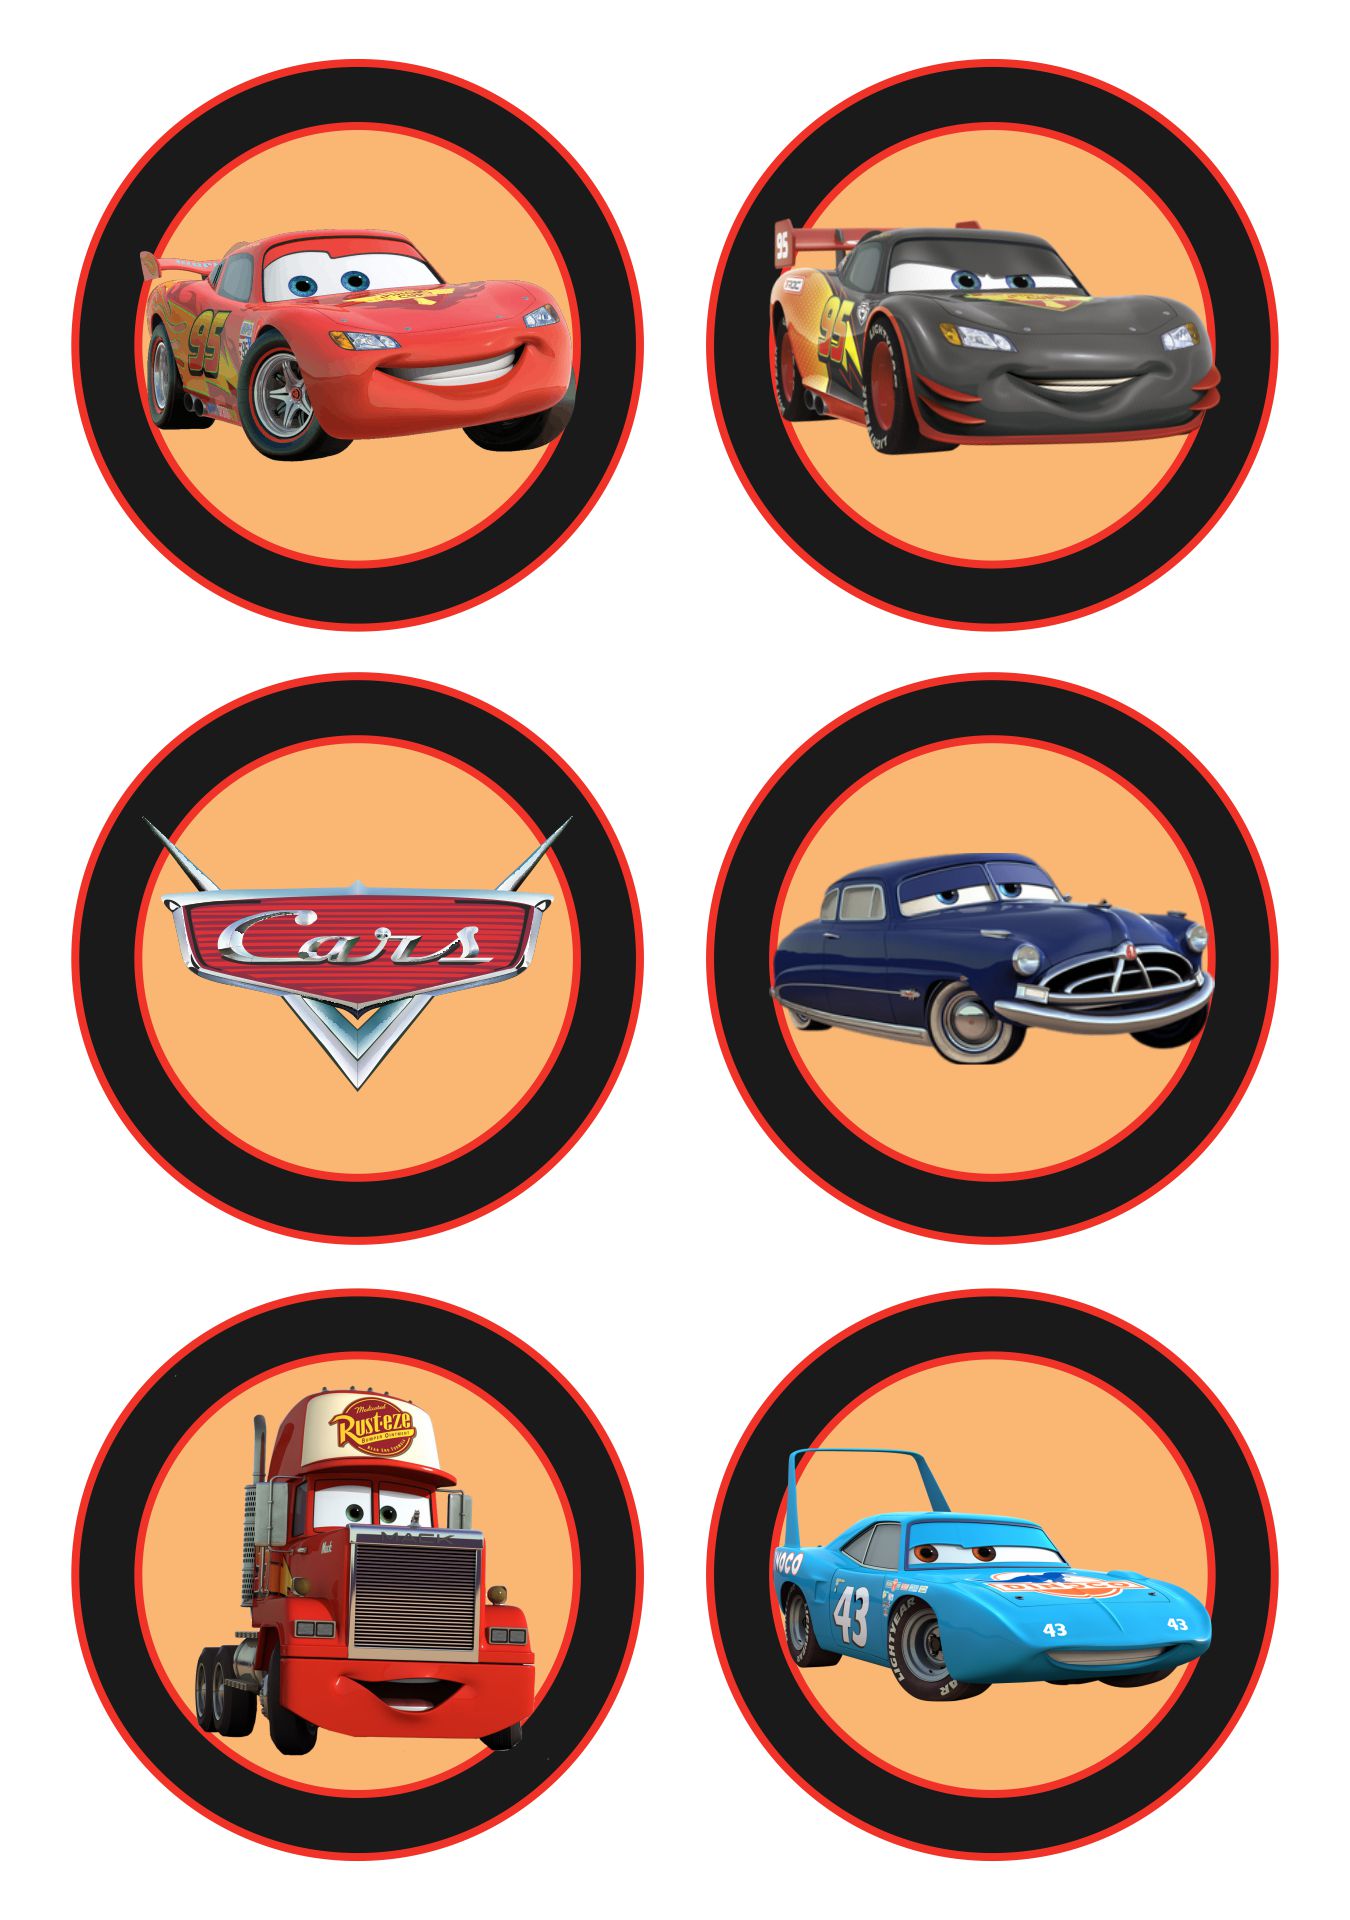 7-best-images-of-printable-disney-cars-cake-toppers-disney-cars-cupcake-topper-printable